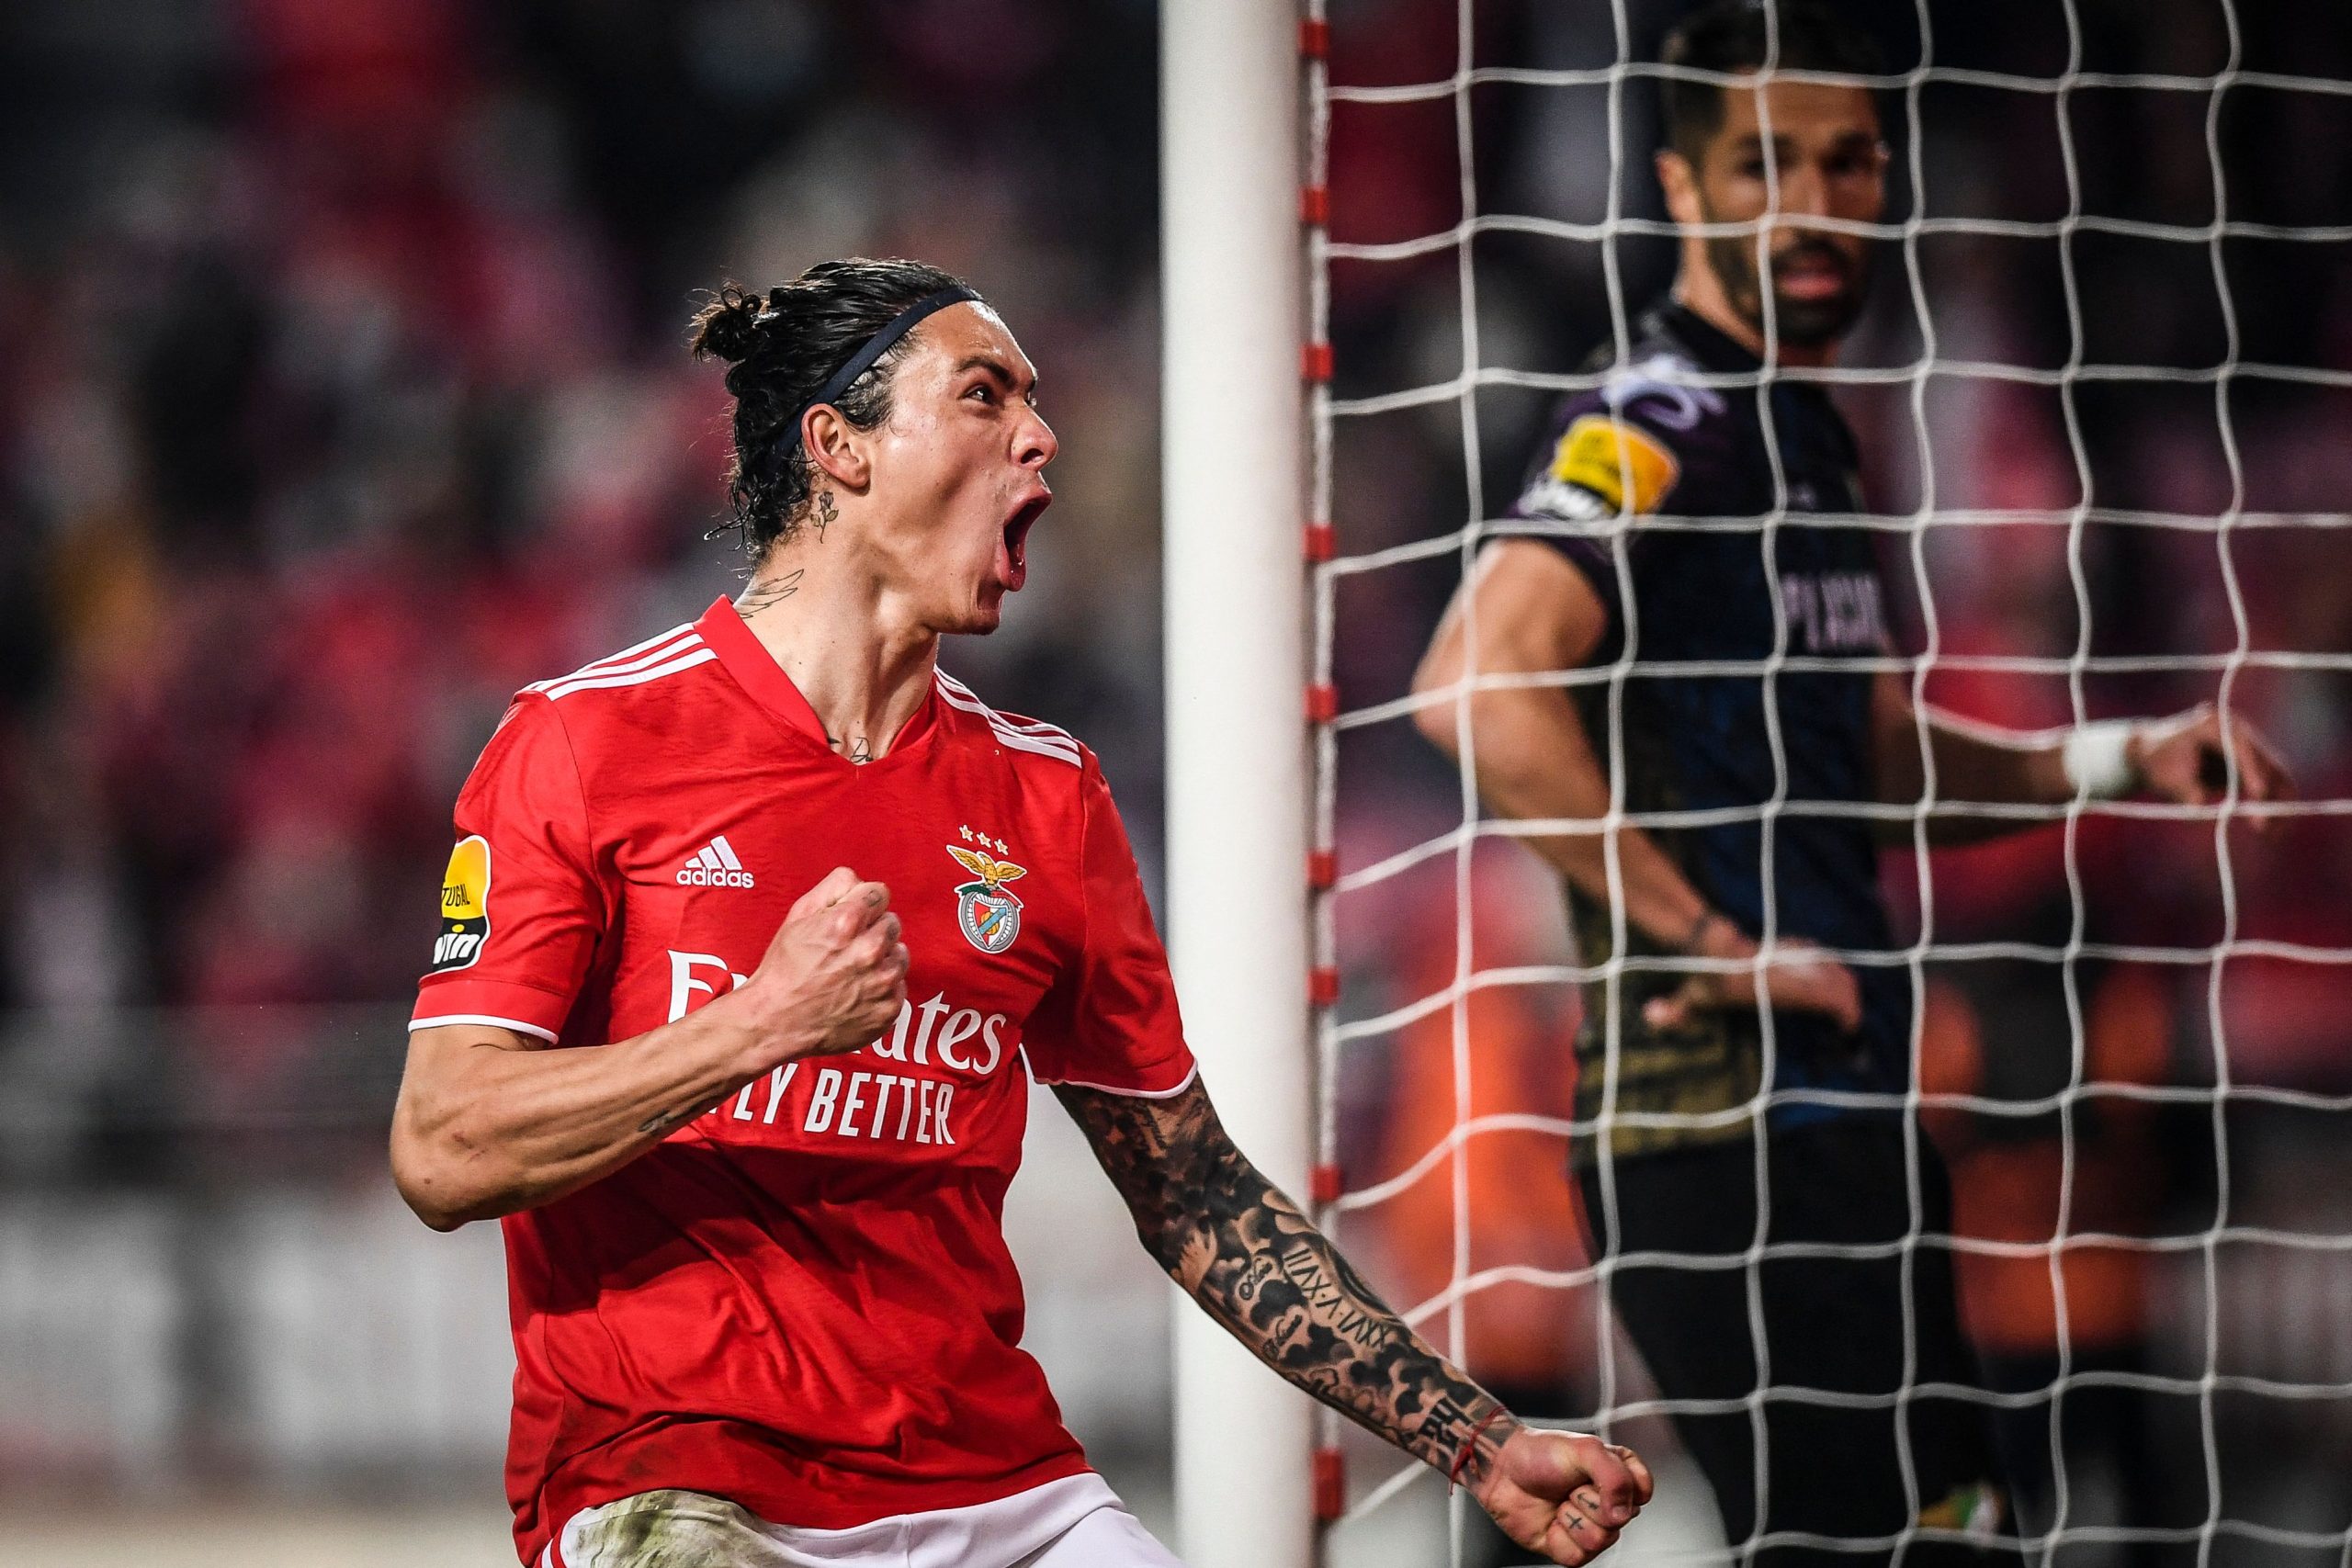 Benfica's Uruguayan forward Darwin Nunez celebrates after scoring a goal during the Portuguese league football match between SL Benfica and Moreirense FC at the Luz stadium in Lisbon on January 15, 2022. (Photo by PATRICIA DE MELO MOREIRA / AFP) (Photo by PATRICIA DE MELO MOREIRA/AFP via Getty Images)The 4th Official uses images provided by the following image agency: Getty Images (https://www.gettyimages.de/) Imago Images (https://www.imago-images.de/)
Must Read
English Premier LeagueFebruary 11, 2022
3 Players Manchester United Should Sign in the Summer to Compete in 22/23

ArsenalFebruary 10, 2022
Gabriel Gets 8, Martinelli With 5 | Arsenal Players Rated In Narrow Win Vs Wolves

English Premier LeagueFebruary 10, 2022
Jota Gets 8.5, Matip With 8 | Liverpool Players Rated In Impressive Win Vs Leicester City


Abhinab Ghosh
A 26-year-old sports writer and an aspiring football coach who has road-tripped across the Scottish Highlands, but has never been to Wales. Sucker for cliff-hangers and catchy riffs. Known to be a grunger and not to be a stranger.